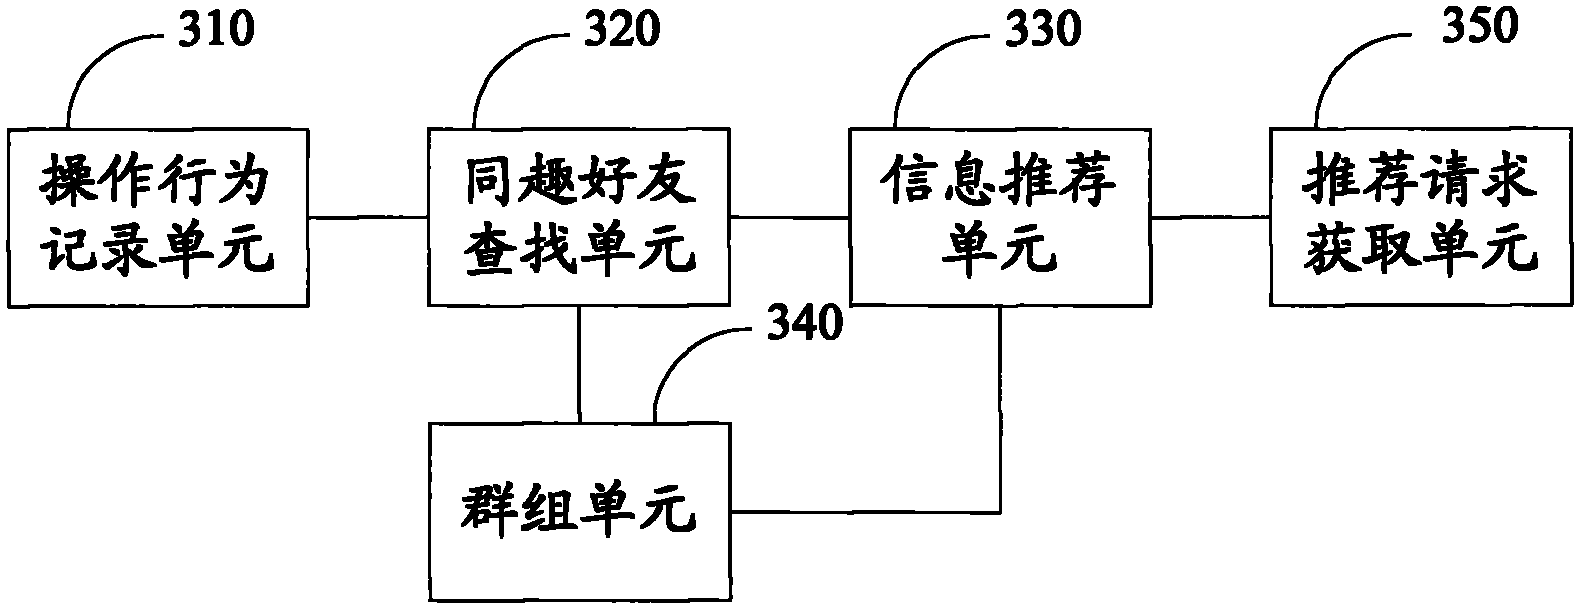 Information recommendation method and system